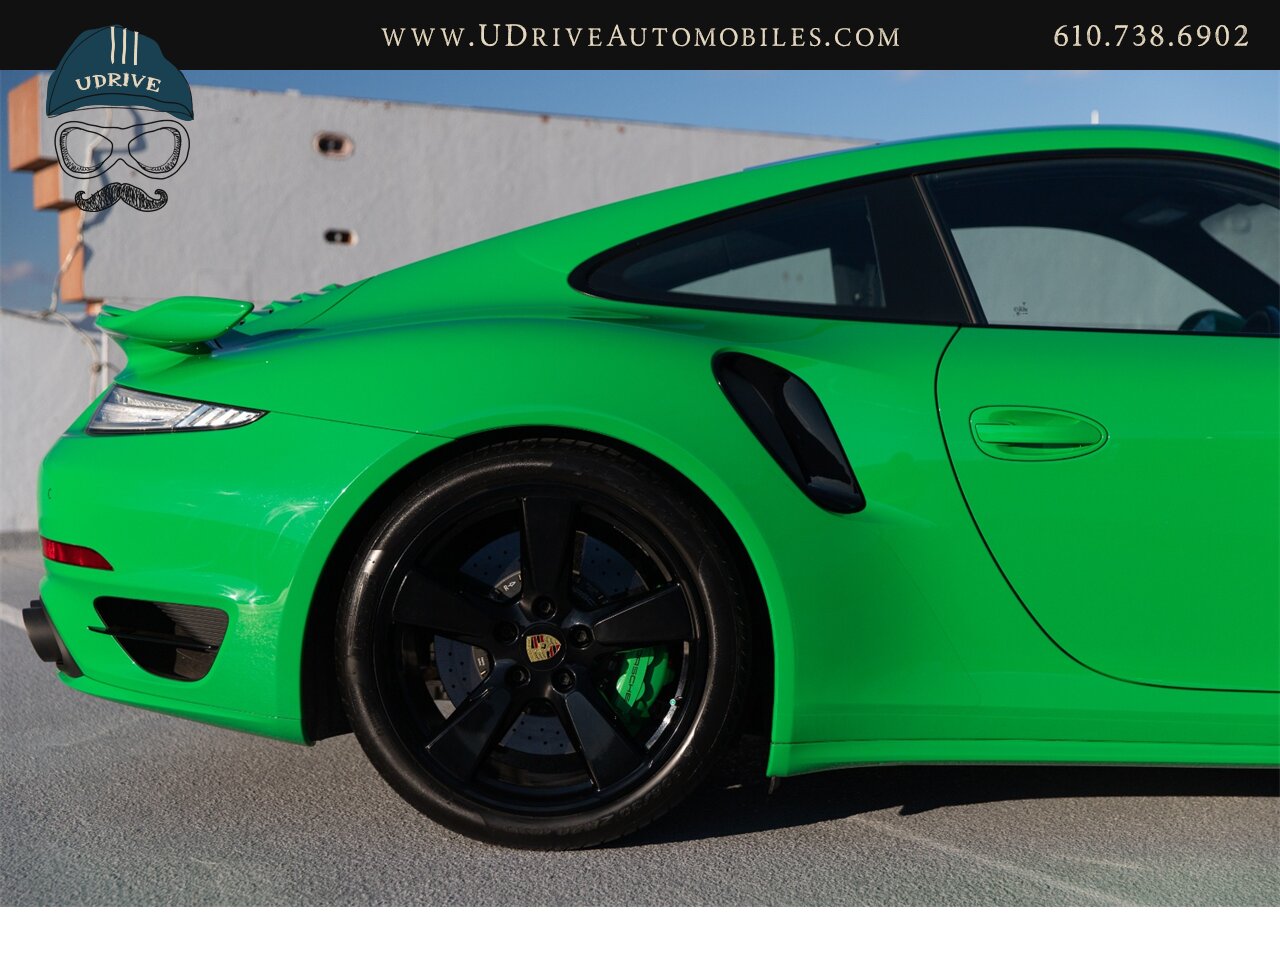 2016 Porsche 911 Turbo S PTS Viper Green Aerokit $203k MSRP  Painted Side Skirts Painted Grilles Wheels in Black - Photo 16 - West Chester, PA 19382